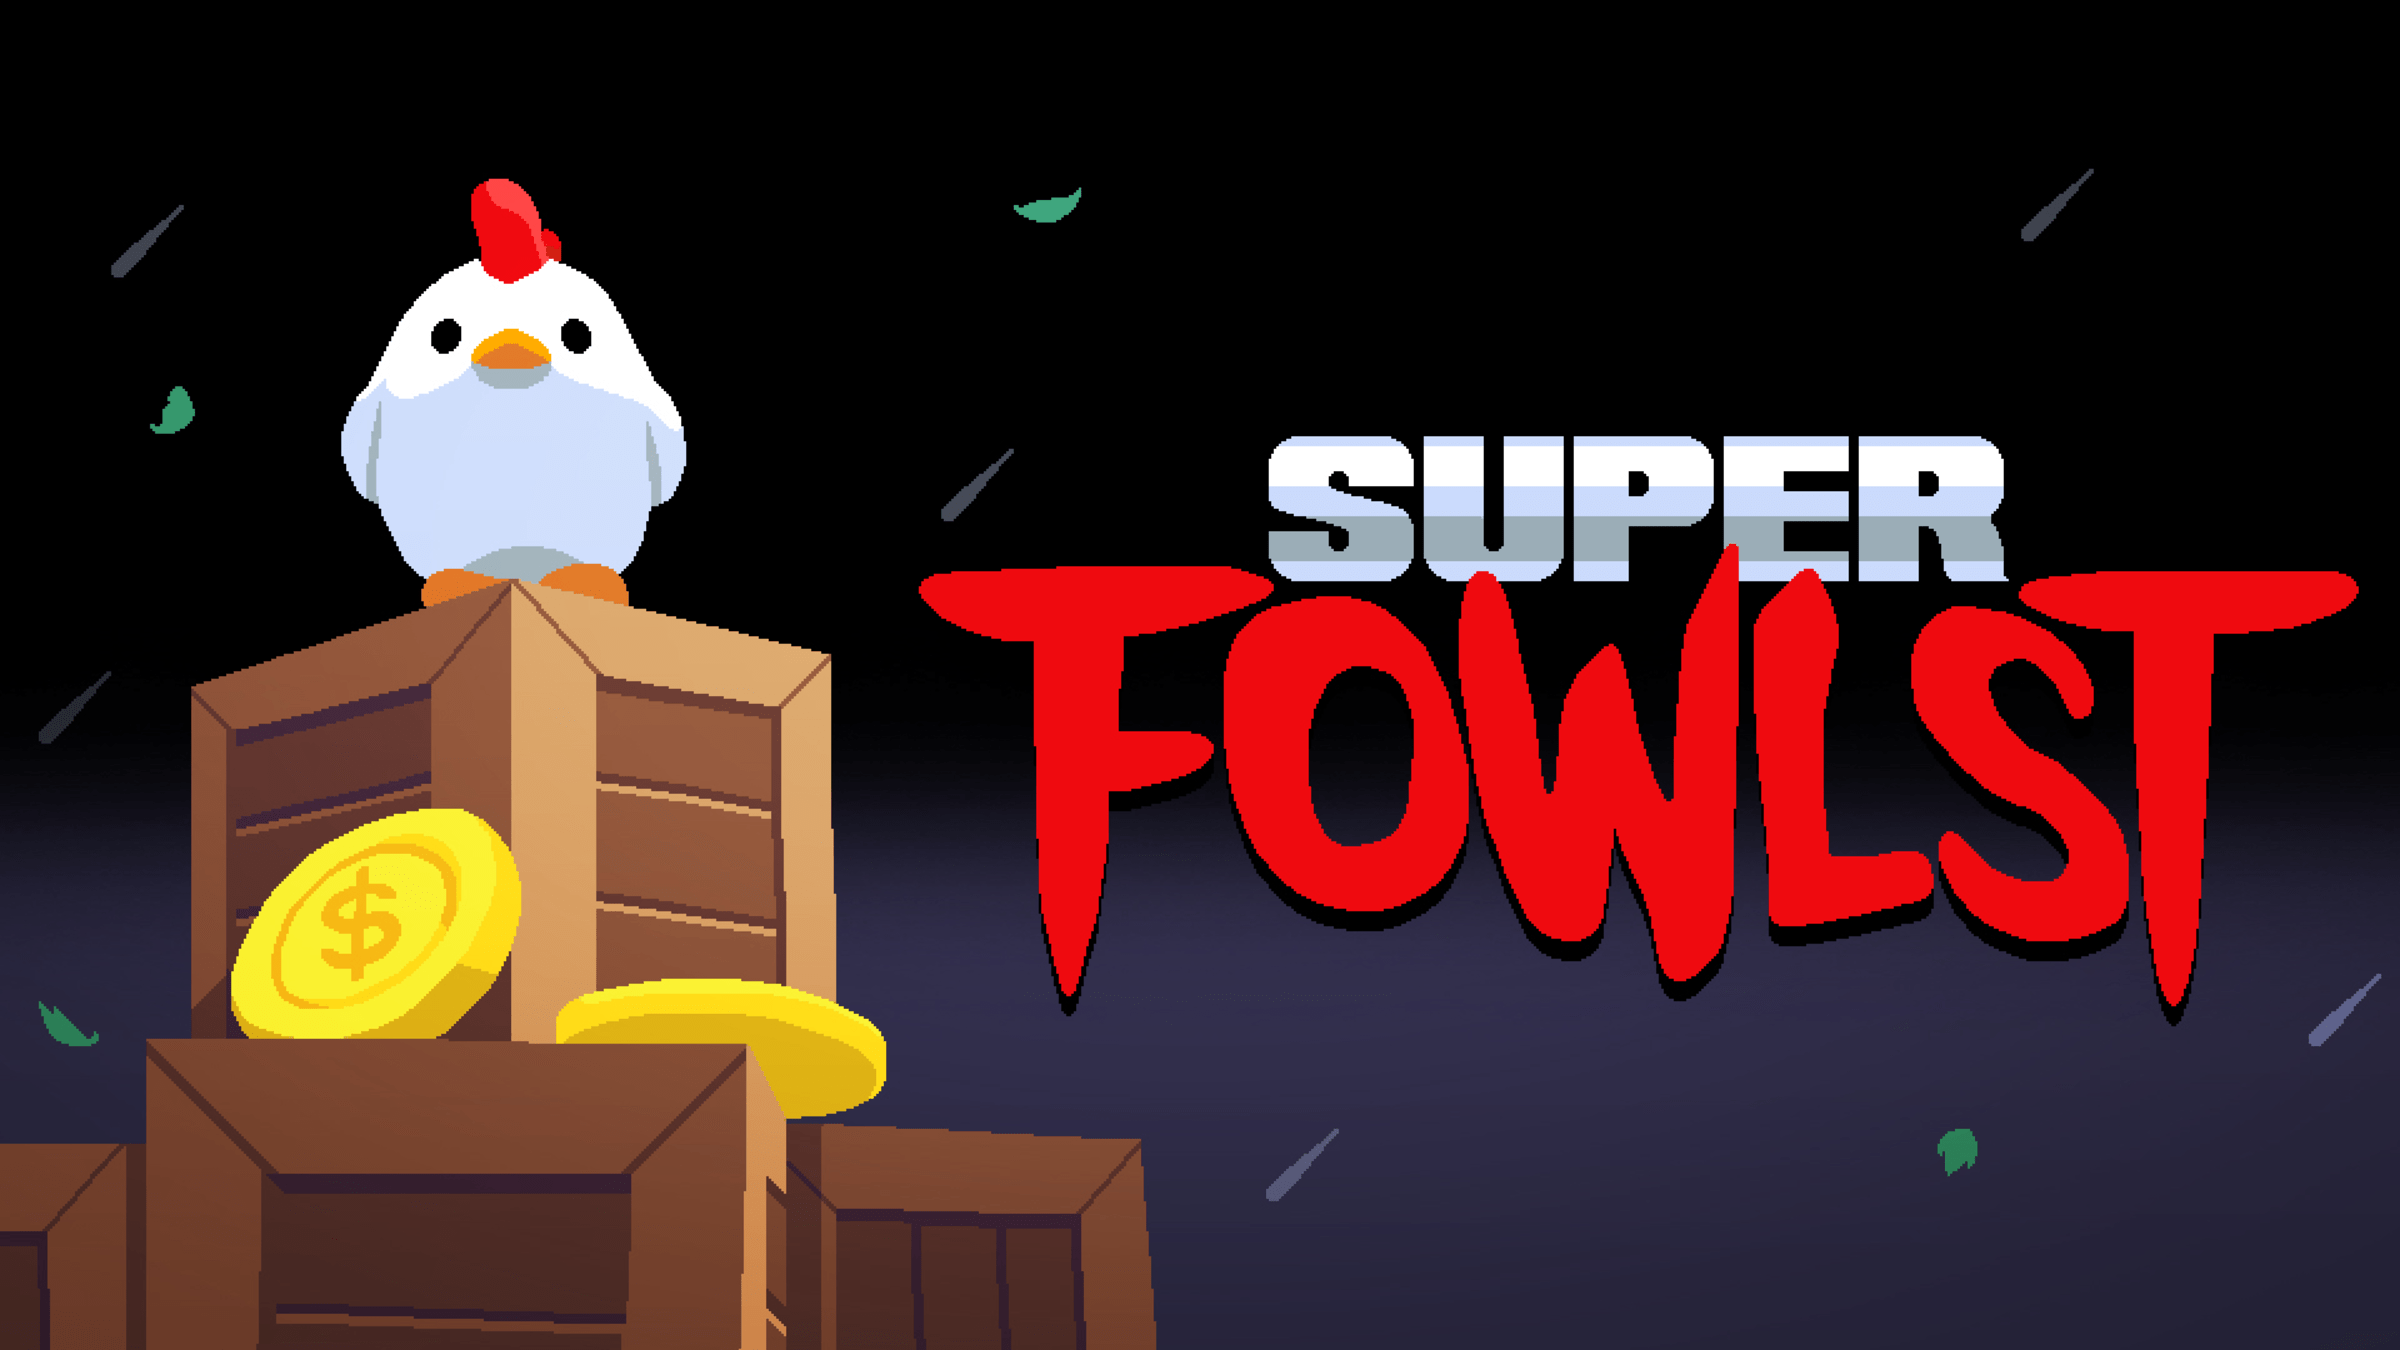 Super Fowlst For Nintendo Switch - Nintendo Official Site